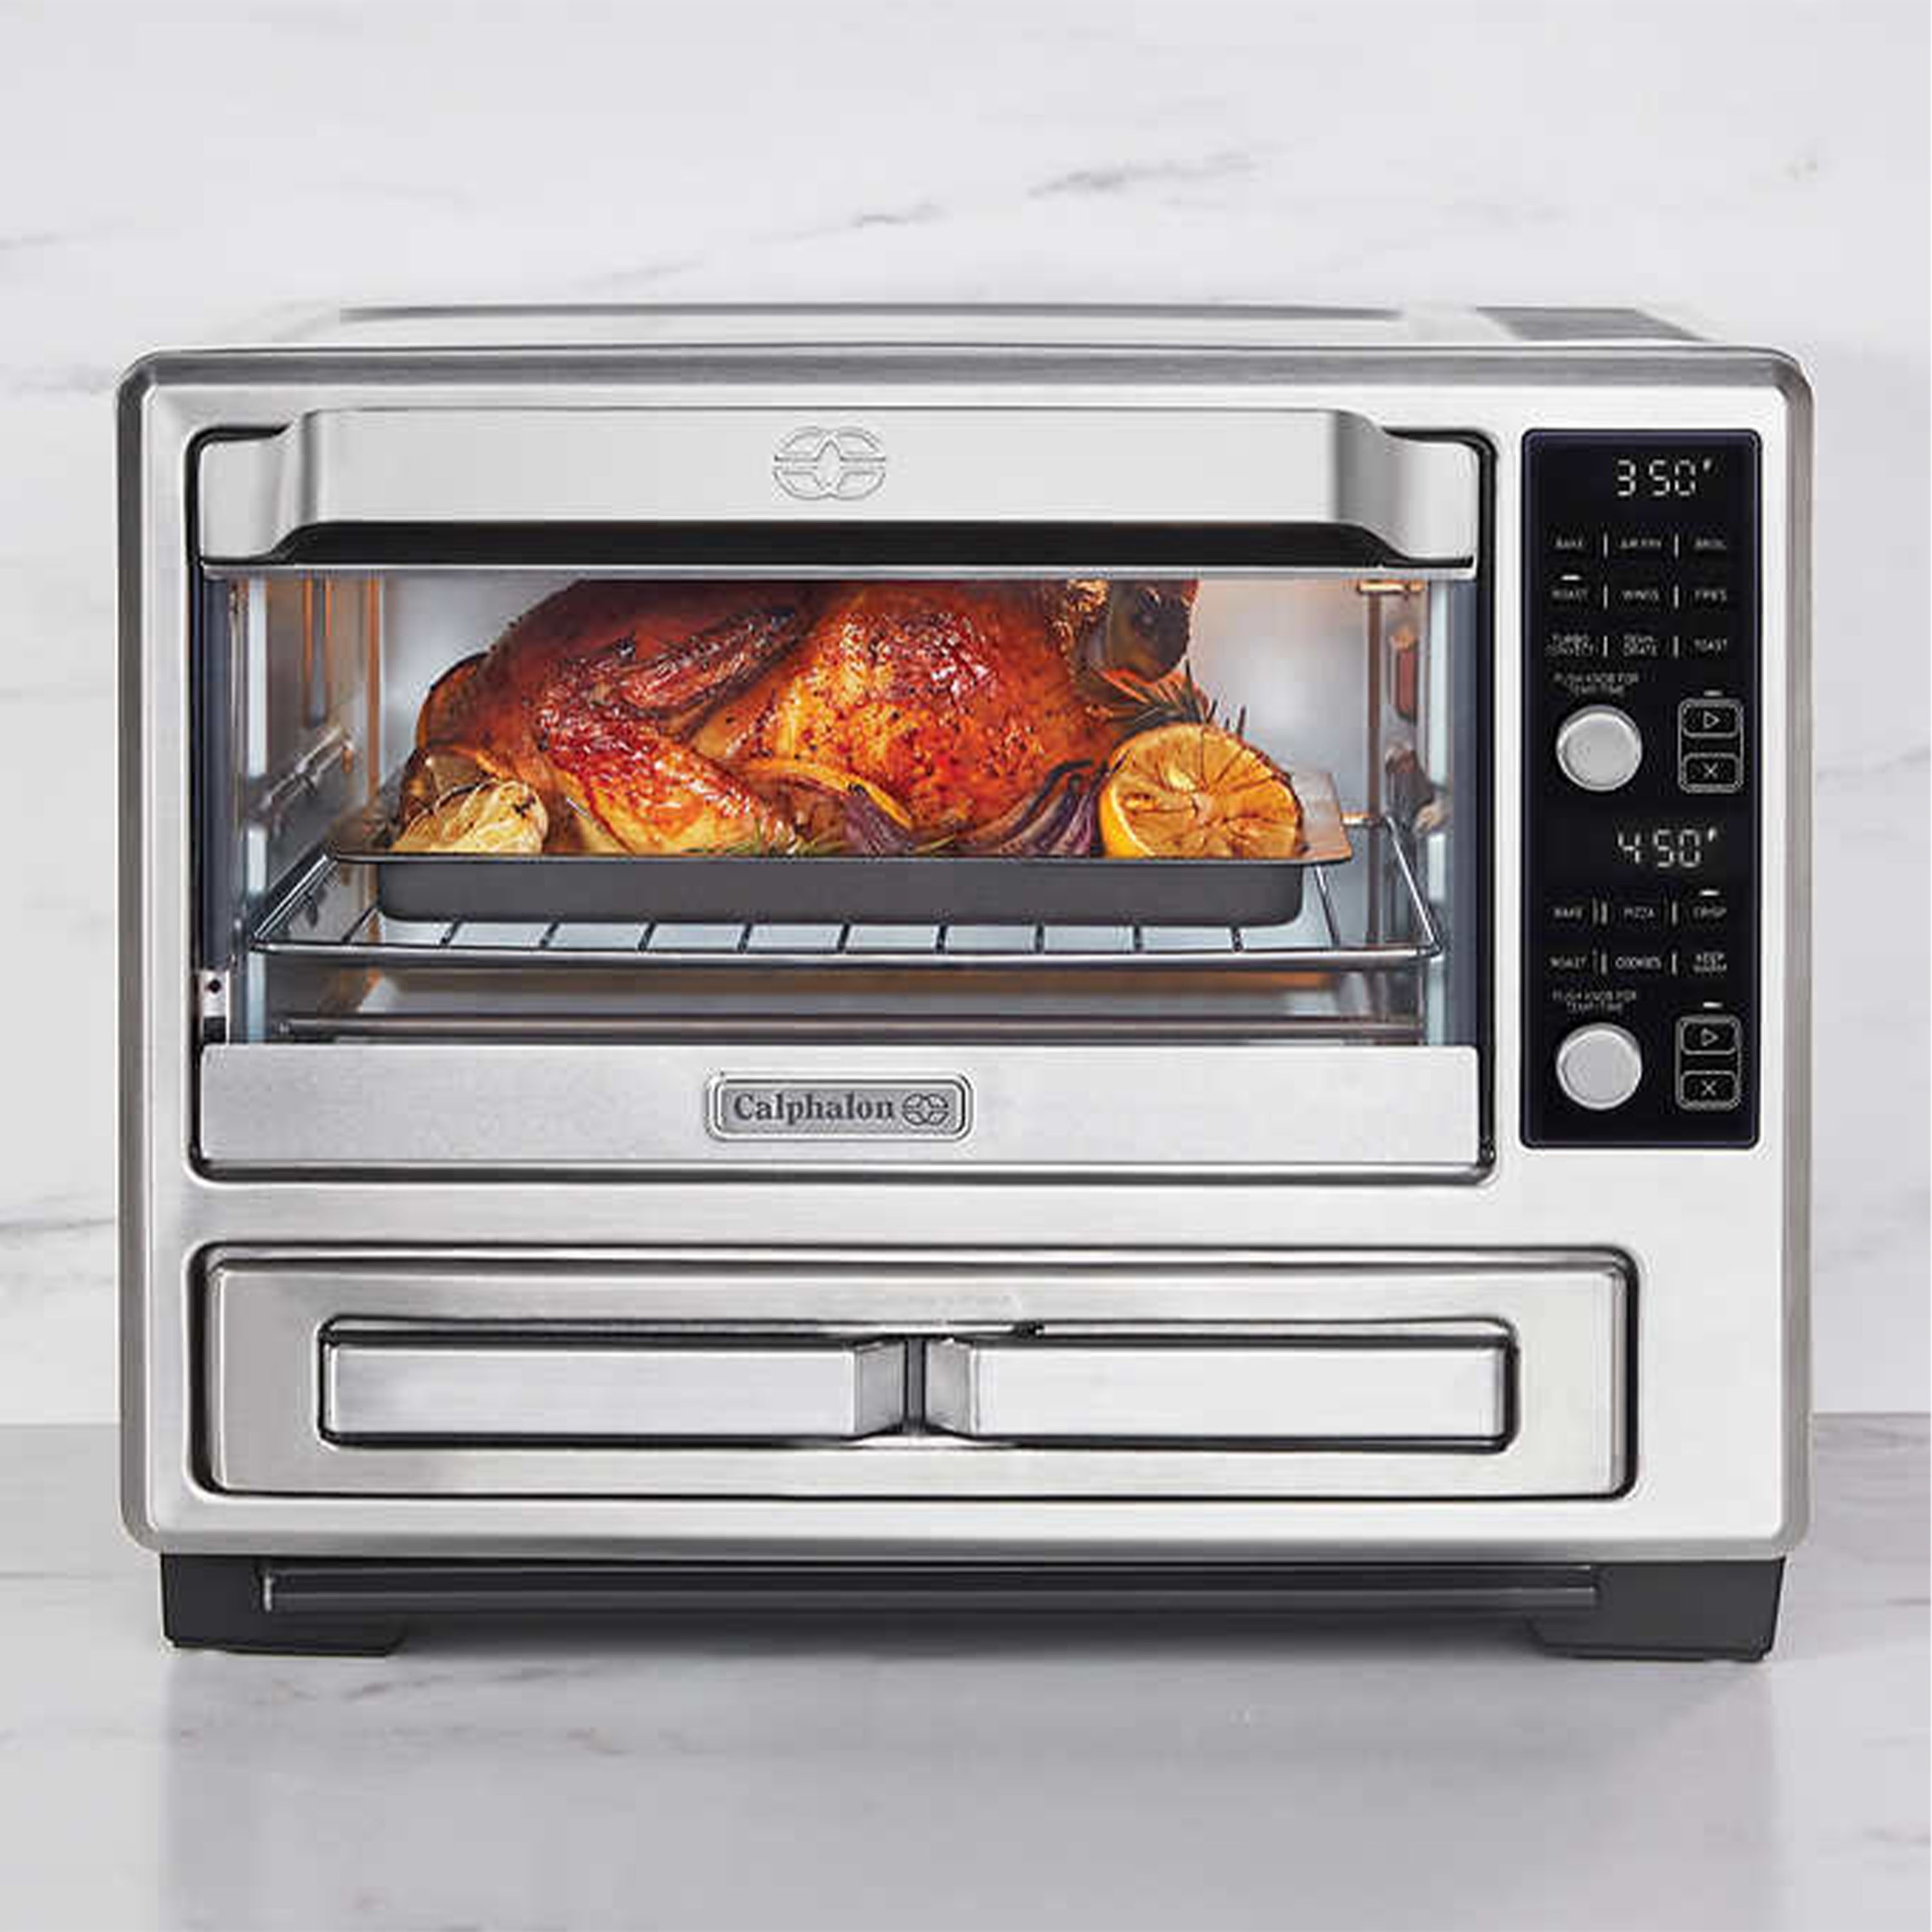 This sleek Calphalon hybrid air fryer and convection oven is $80